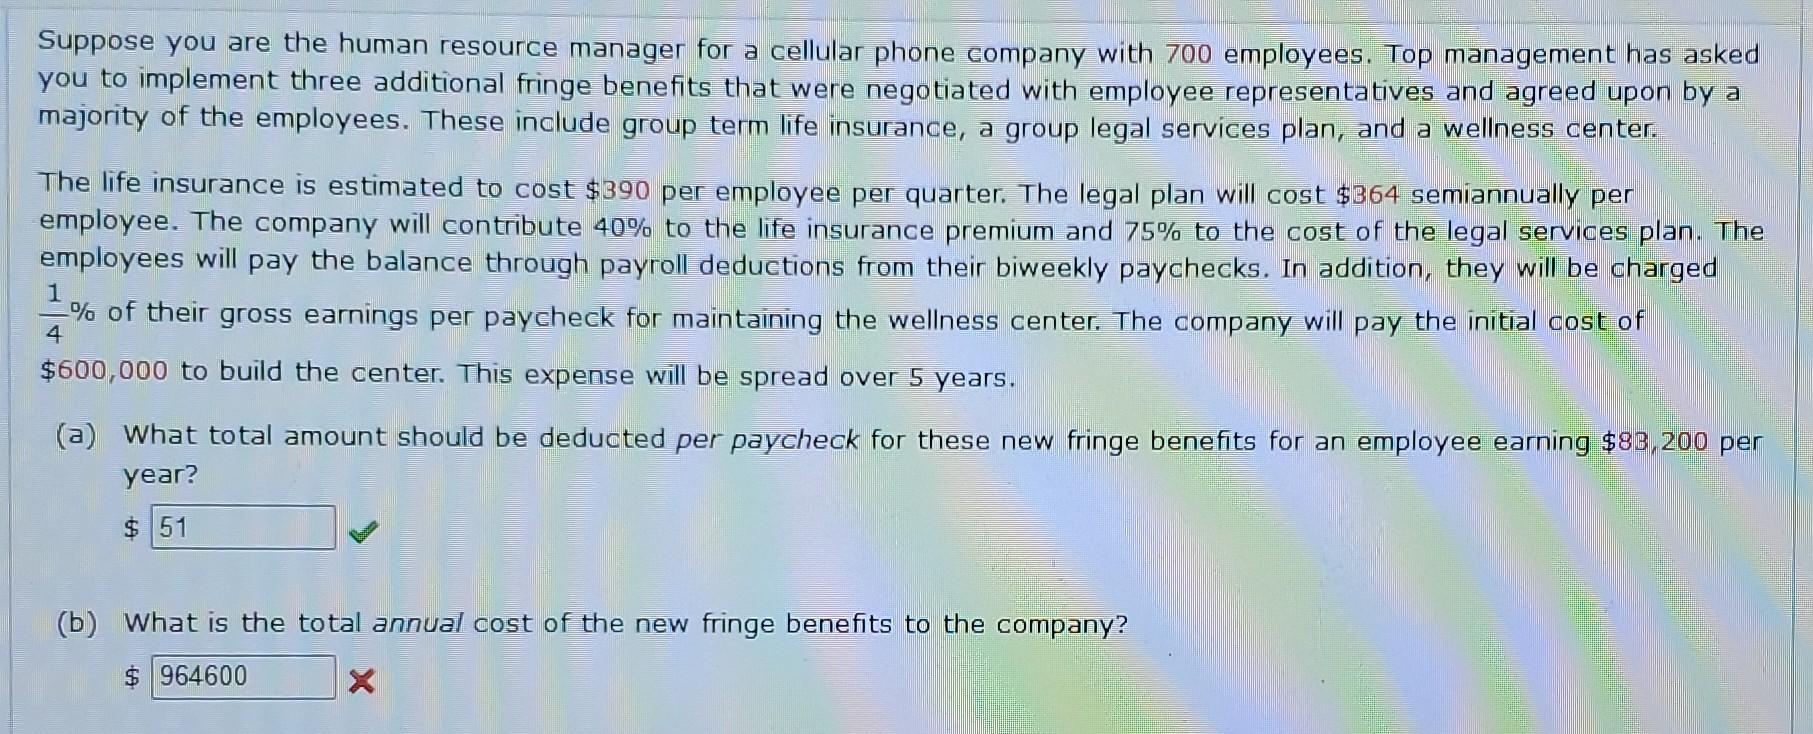 Suppose you are the human resource manager for a cellular phone company with 700 employees. Top management